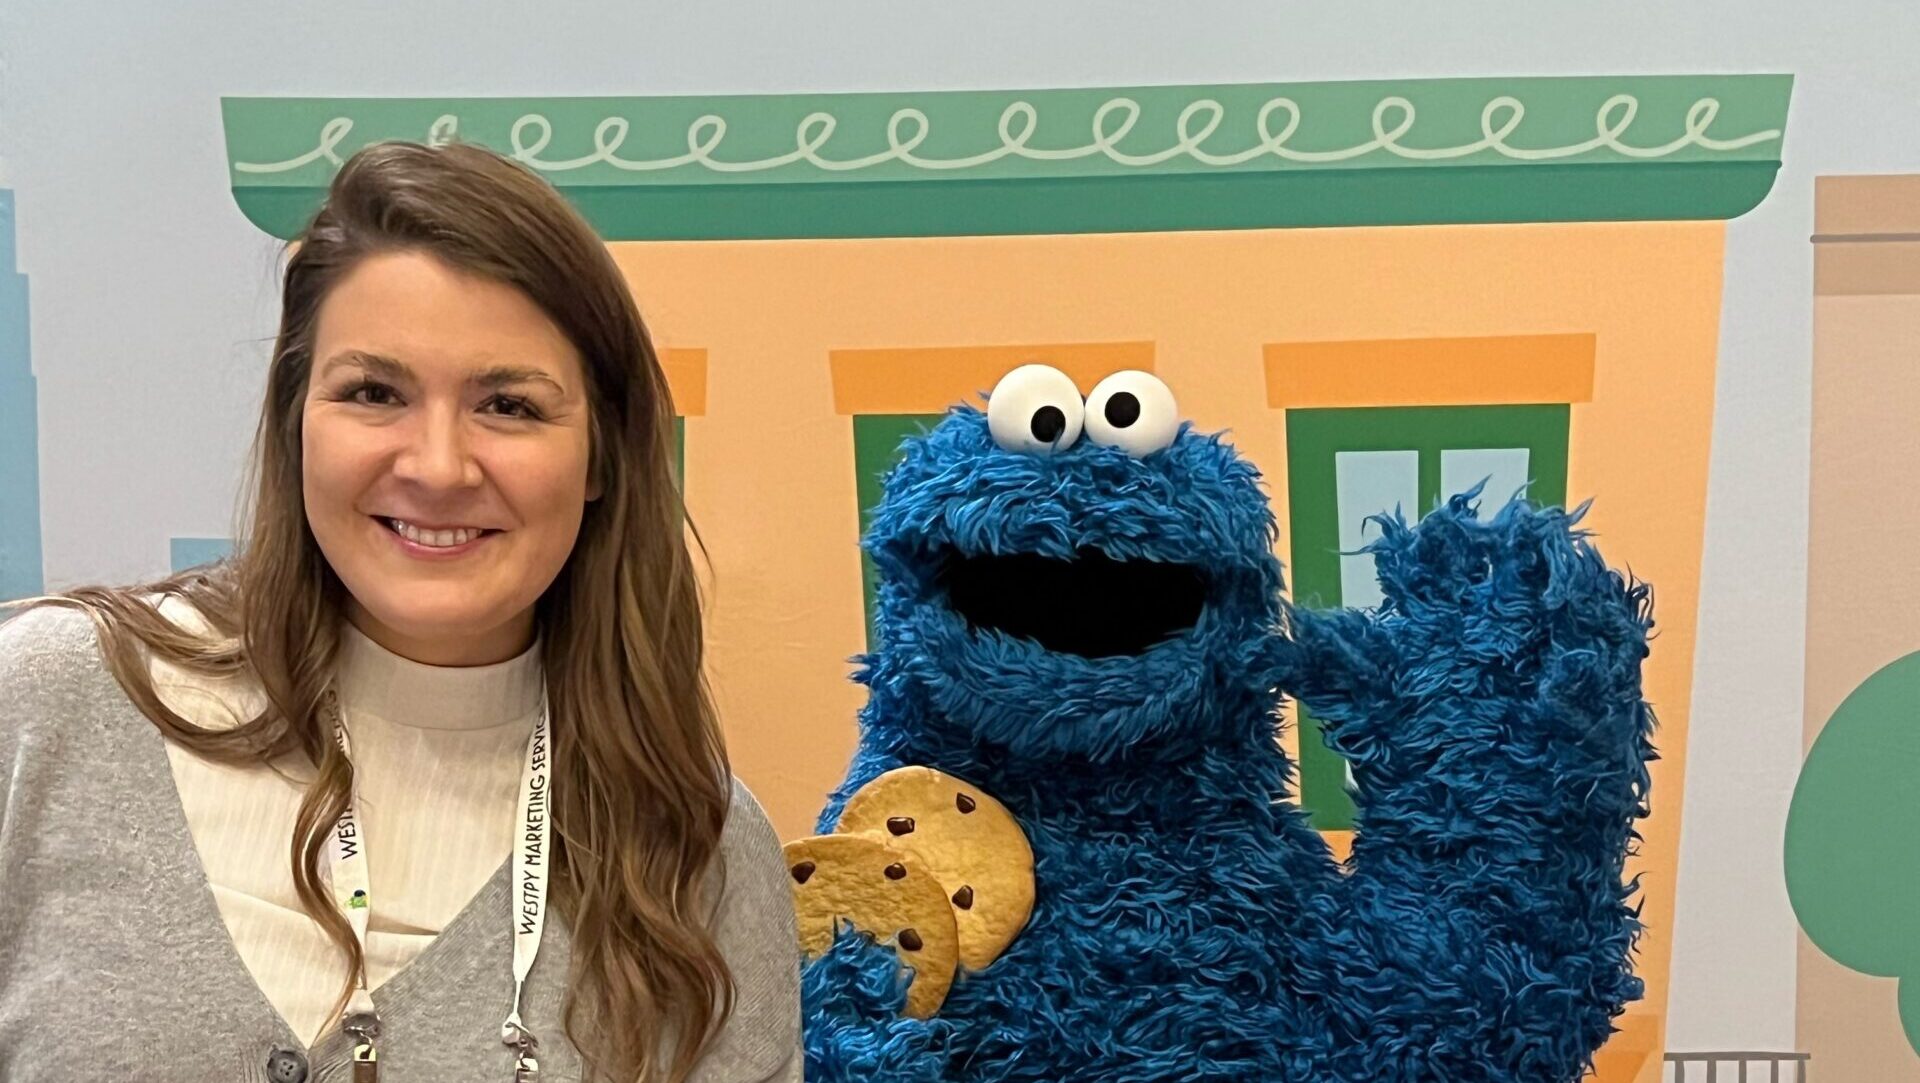 Sydney Forde poses with Cookie Monster, who is holding cookies and waving to the camera